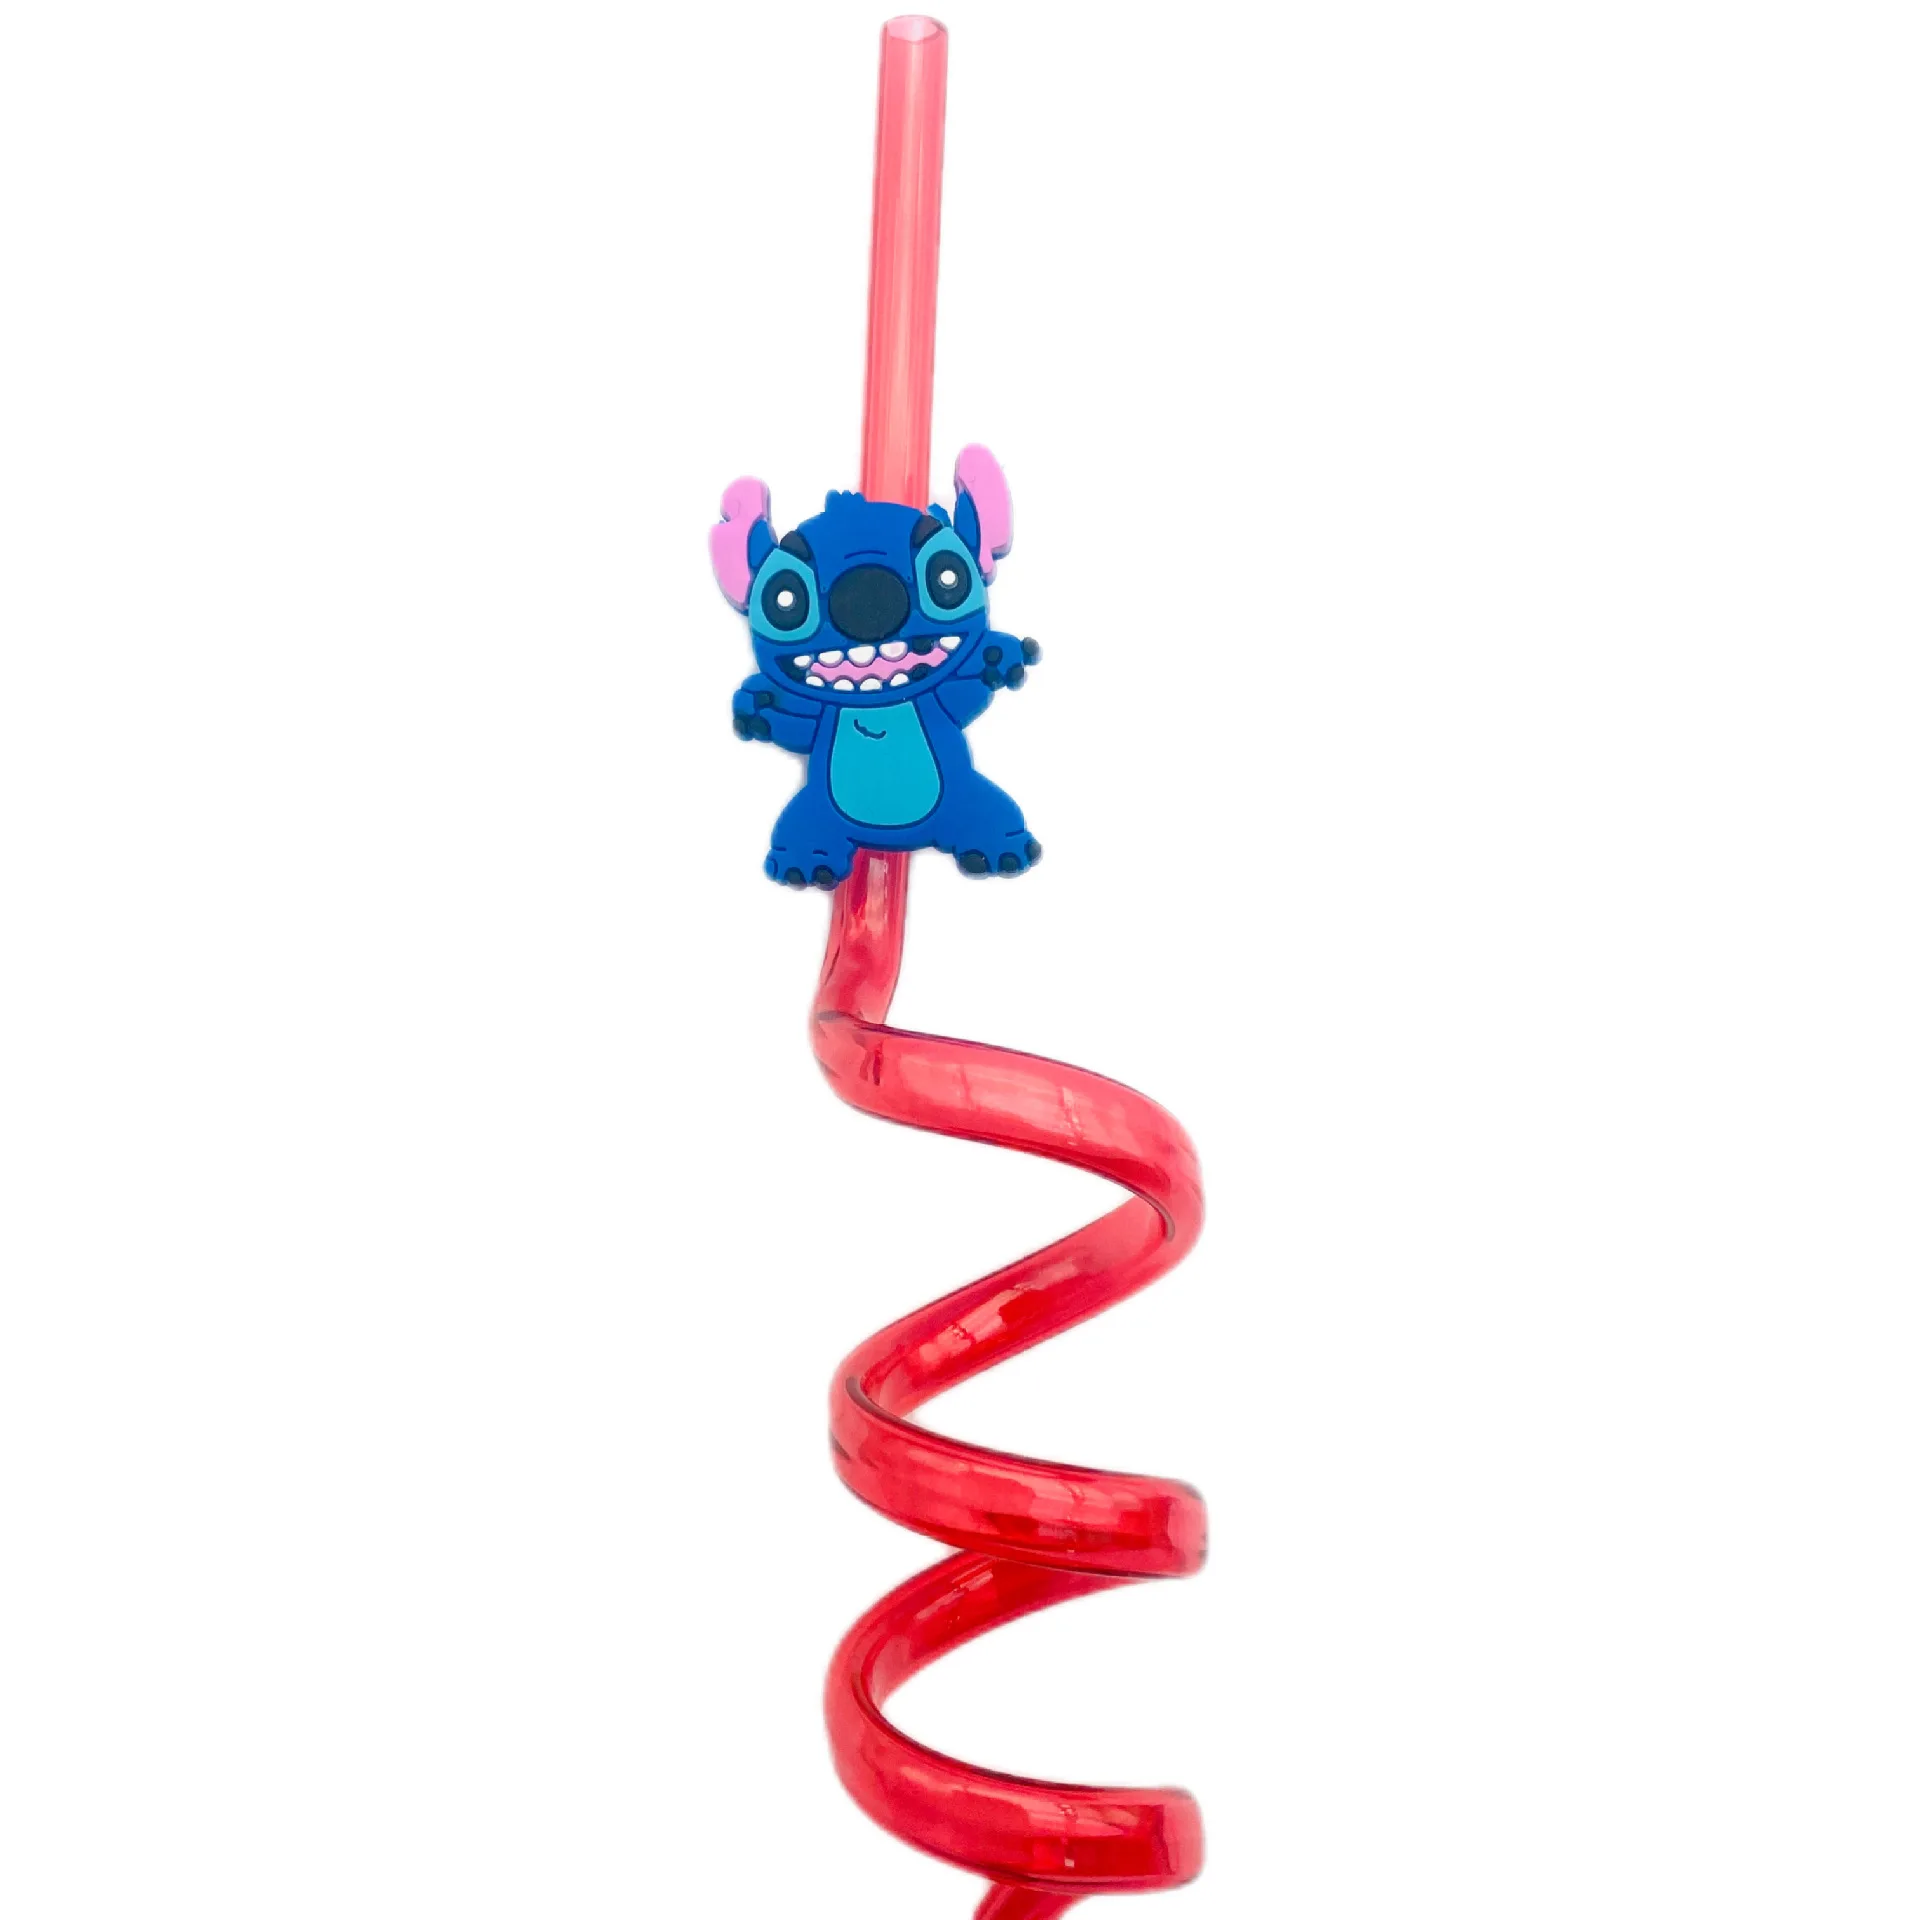 1/5pcs Reusable Lilo & Stitch Straws Reuse Drinking Straws for Kids  Birthday Party Decorations Stitch Birthday Party Supplies